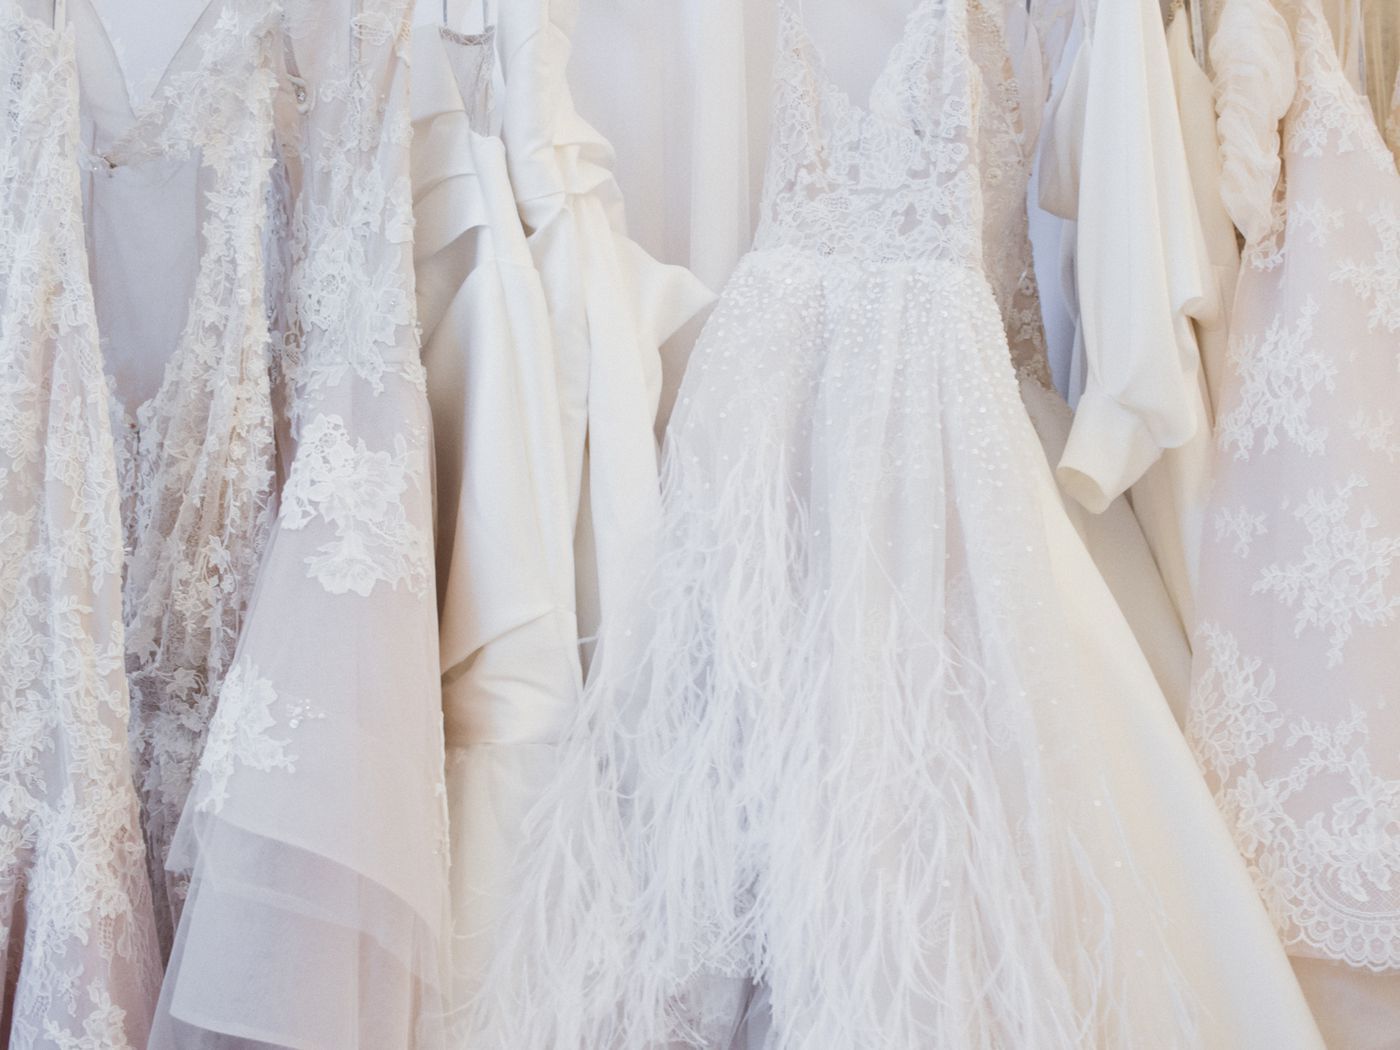 Where to Resell Your Wedding Dress